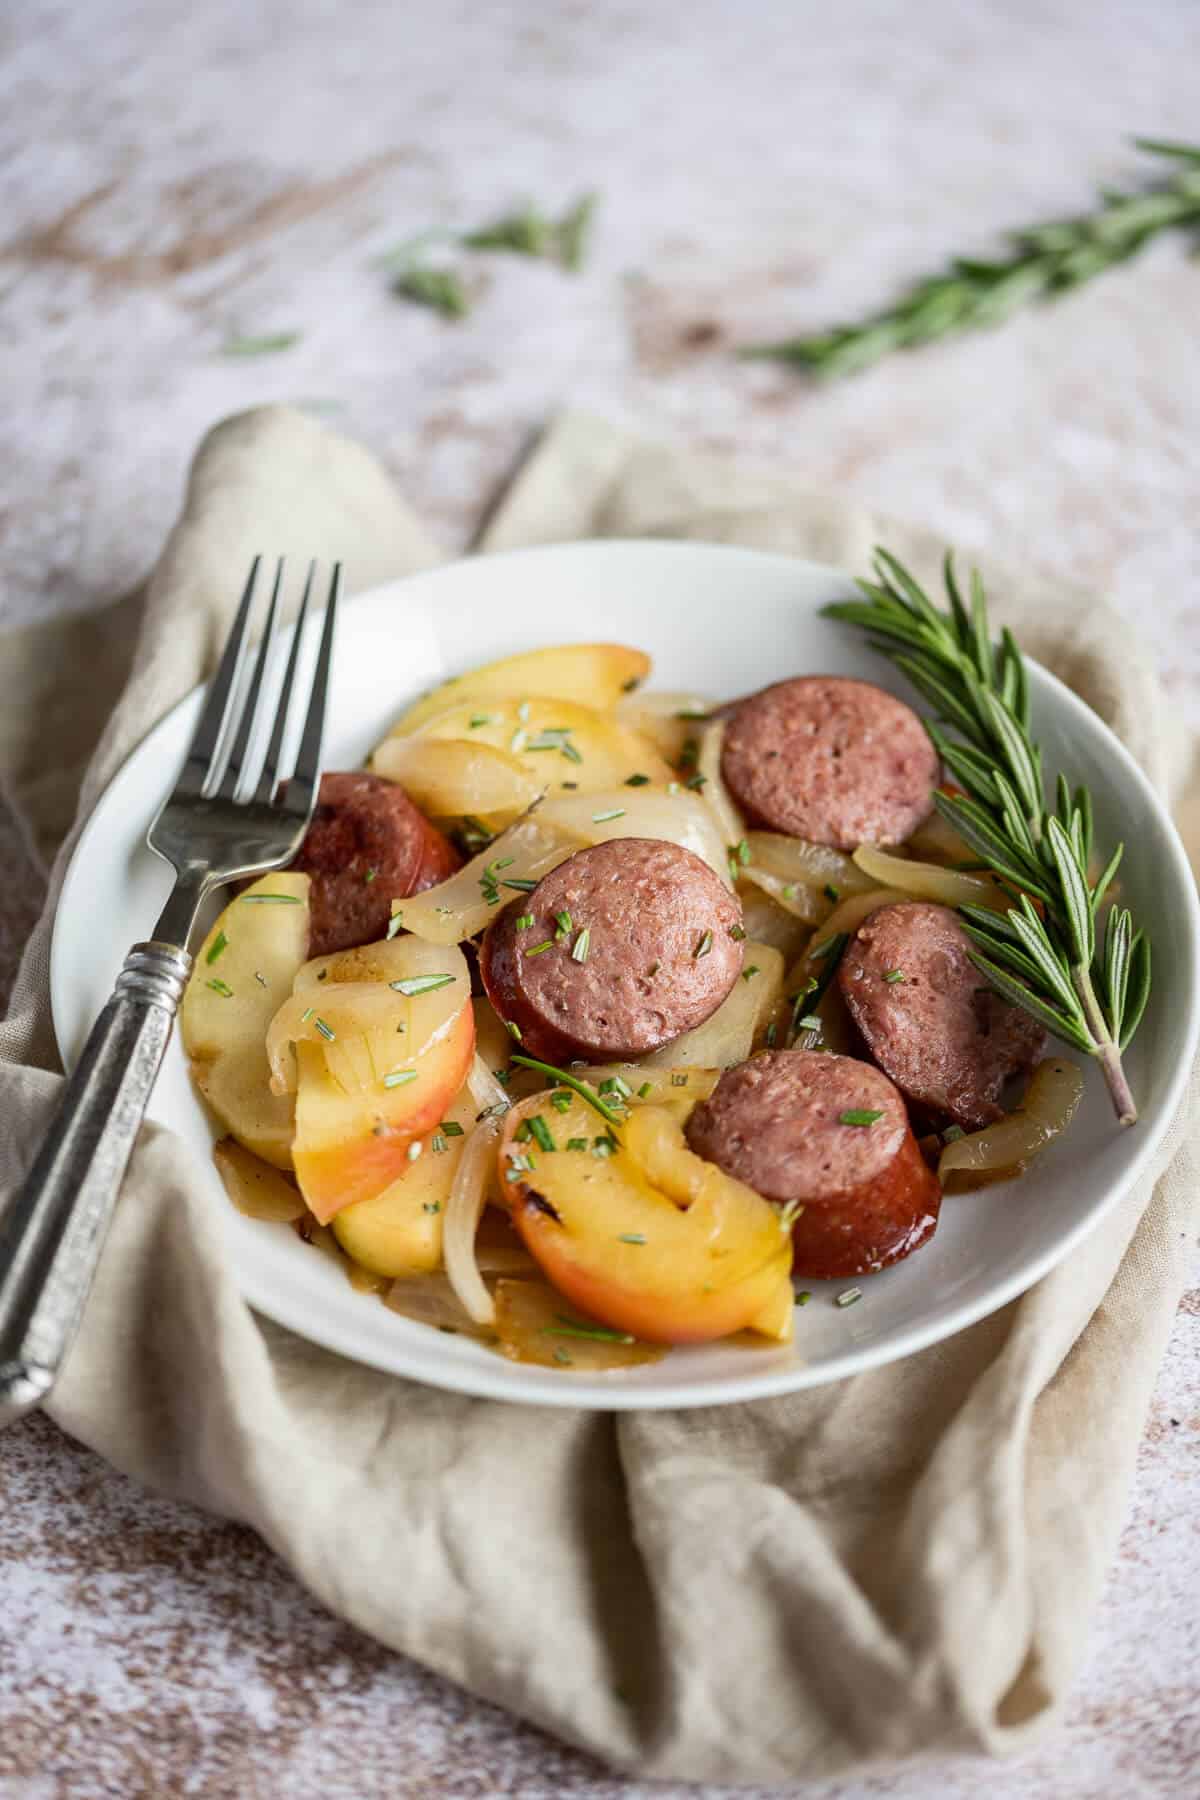 Smoked sausage with sliced apples and onions in a white bowl.